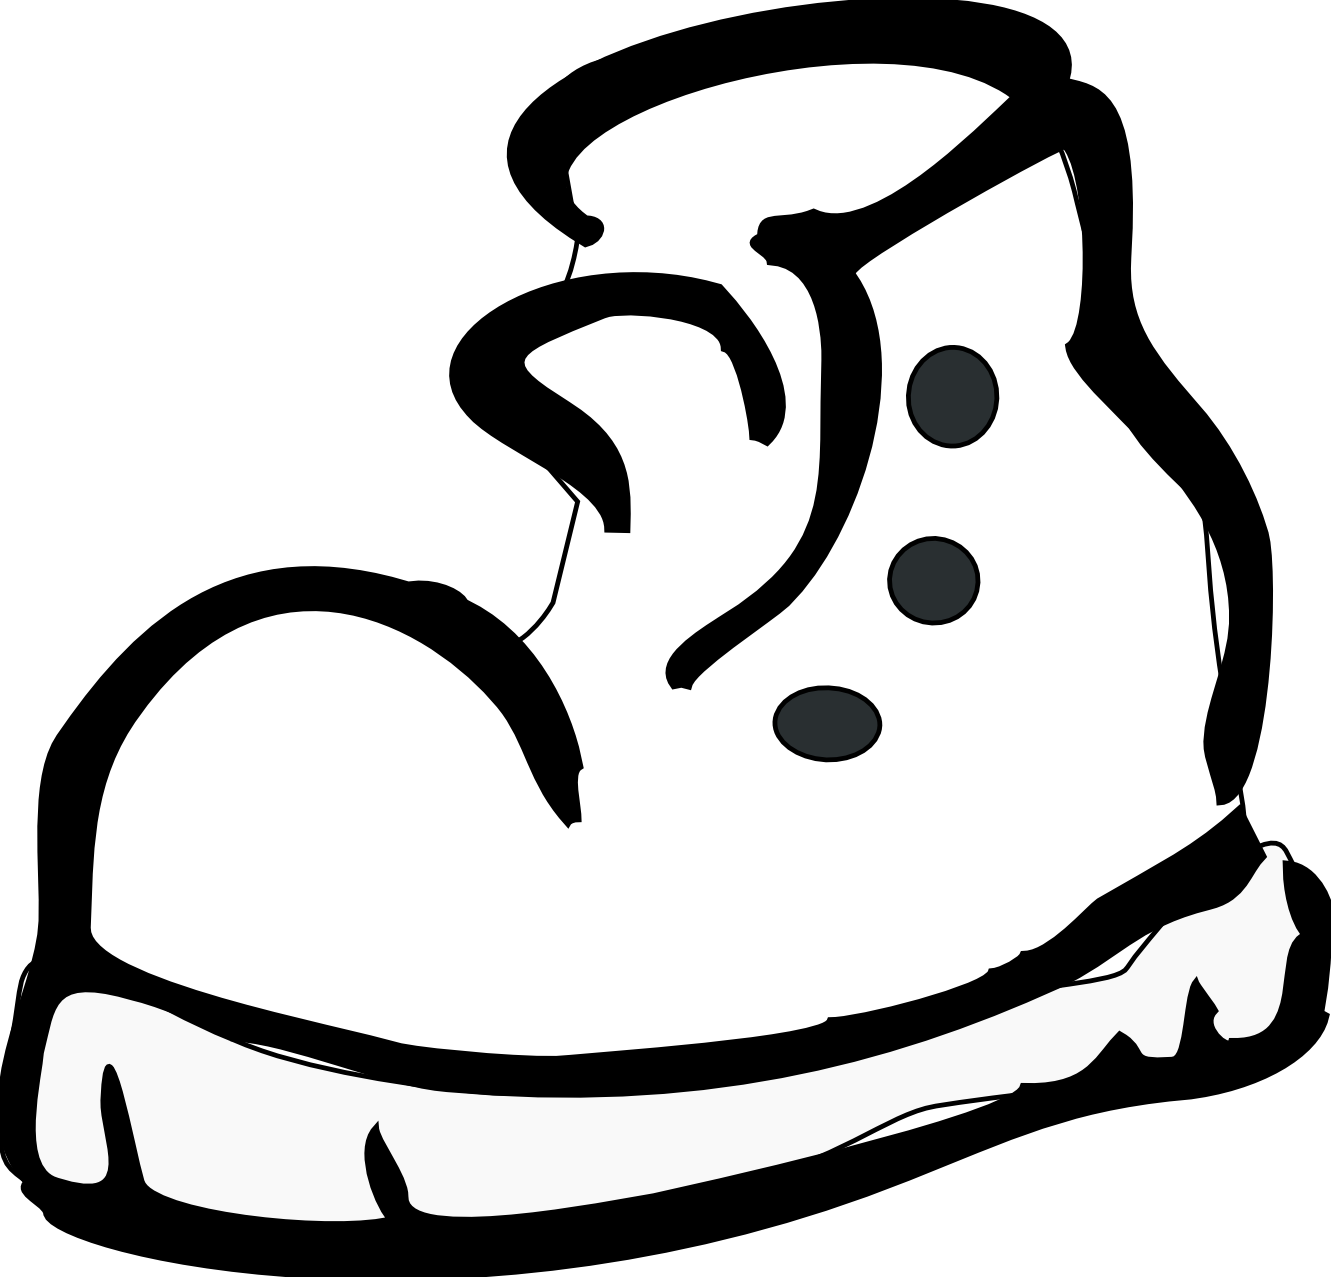 Images For > Converse Shoe Clipart Black And White